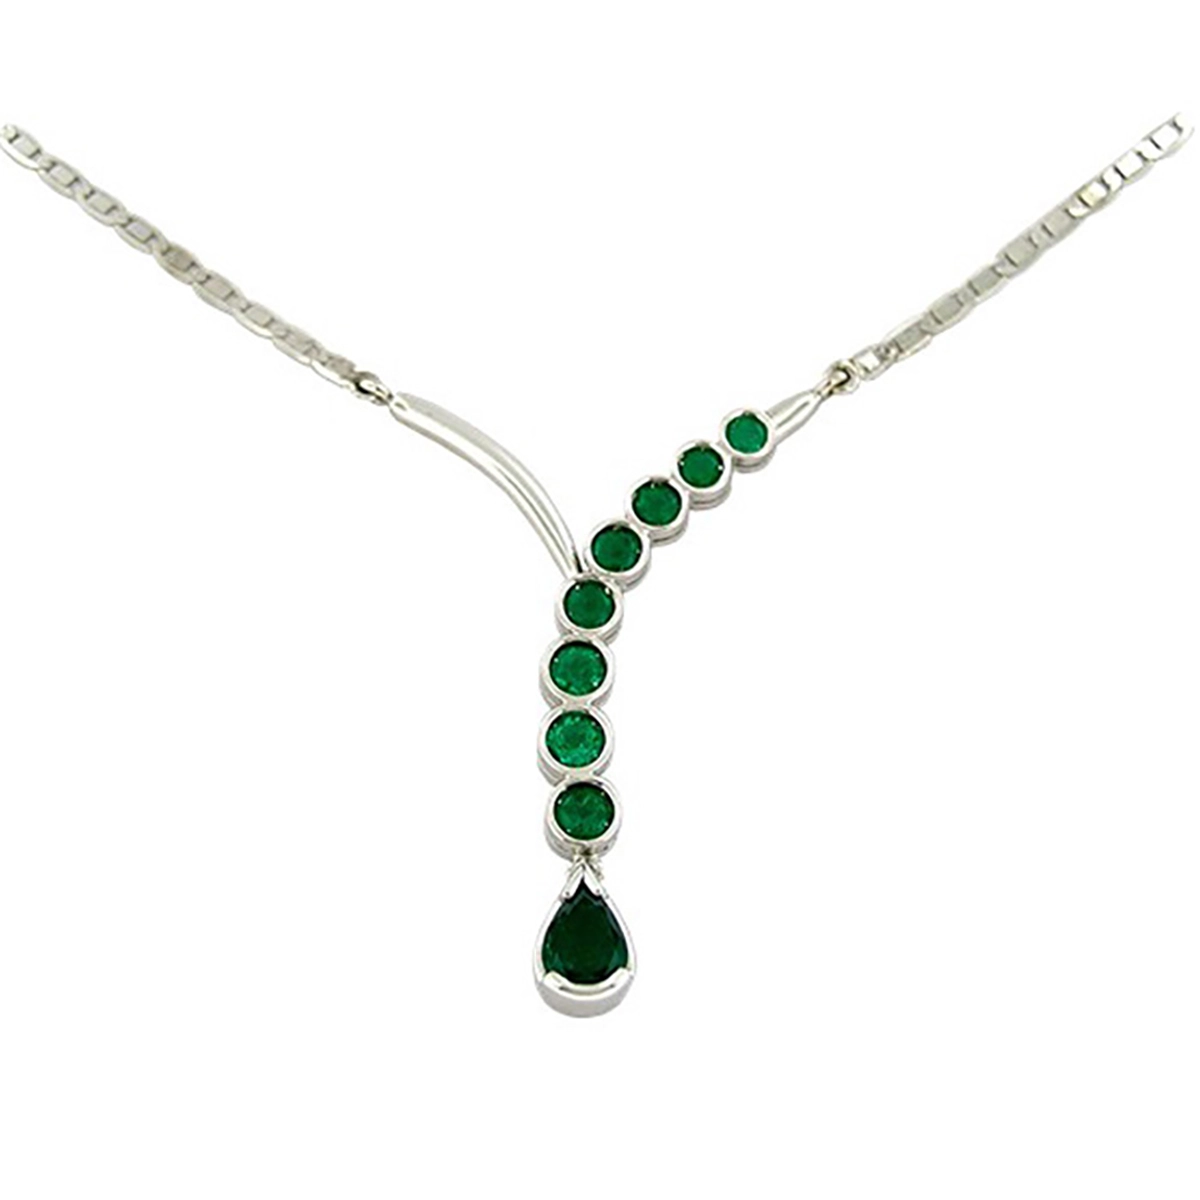 Emerald Necklace in 18K White Gold Bezel Set with Round Emeralds